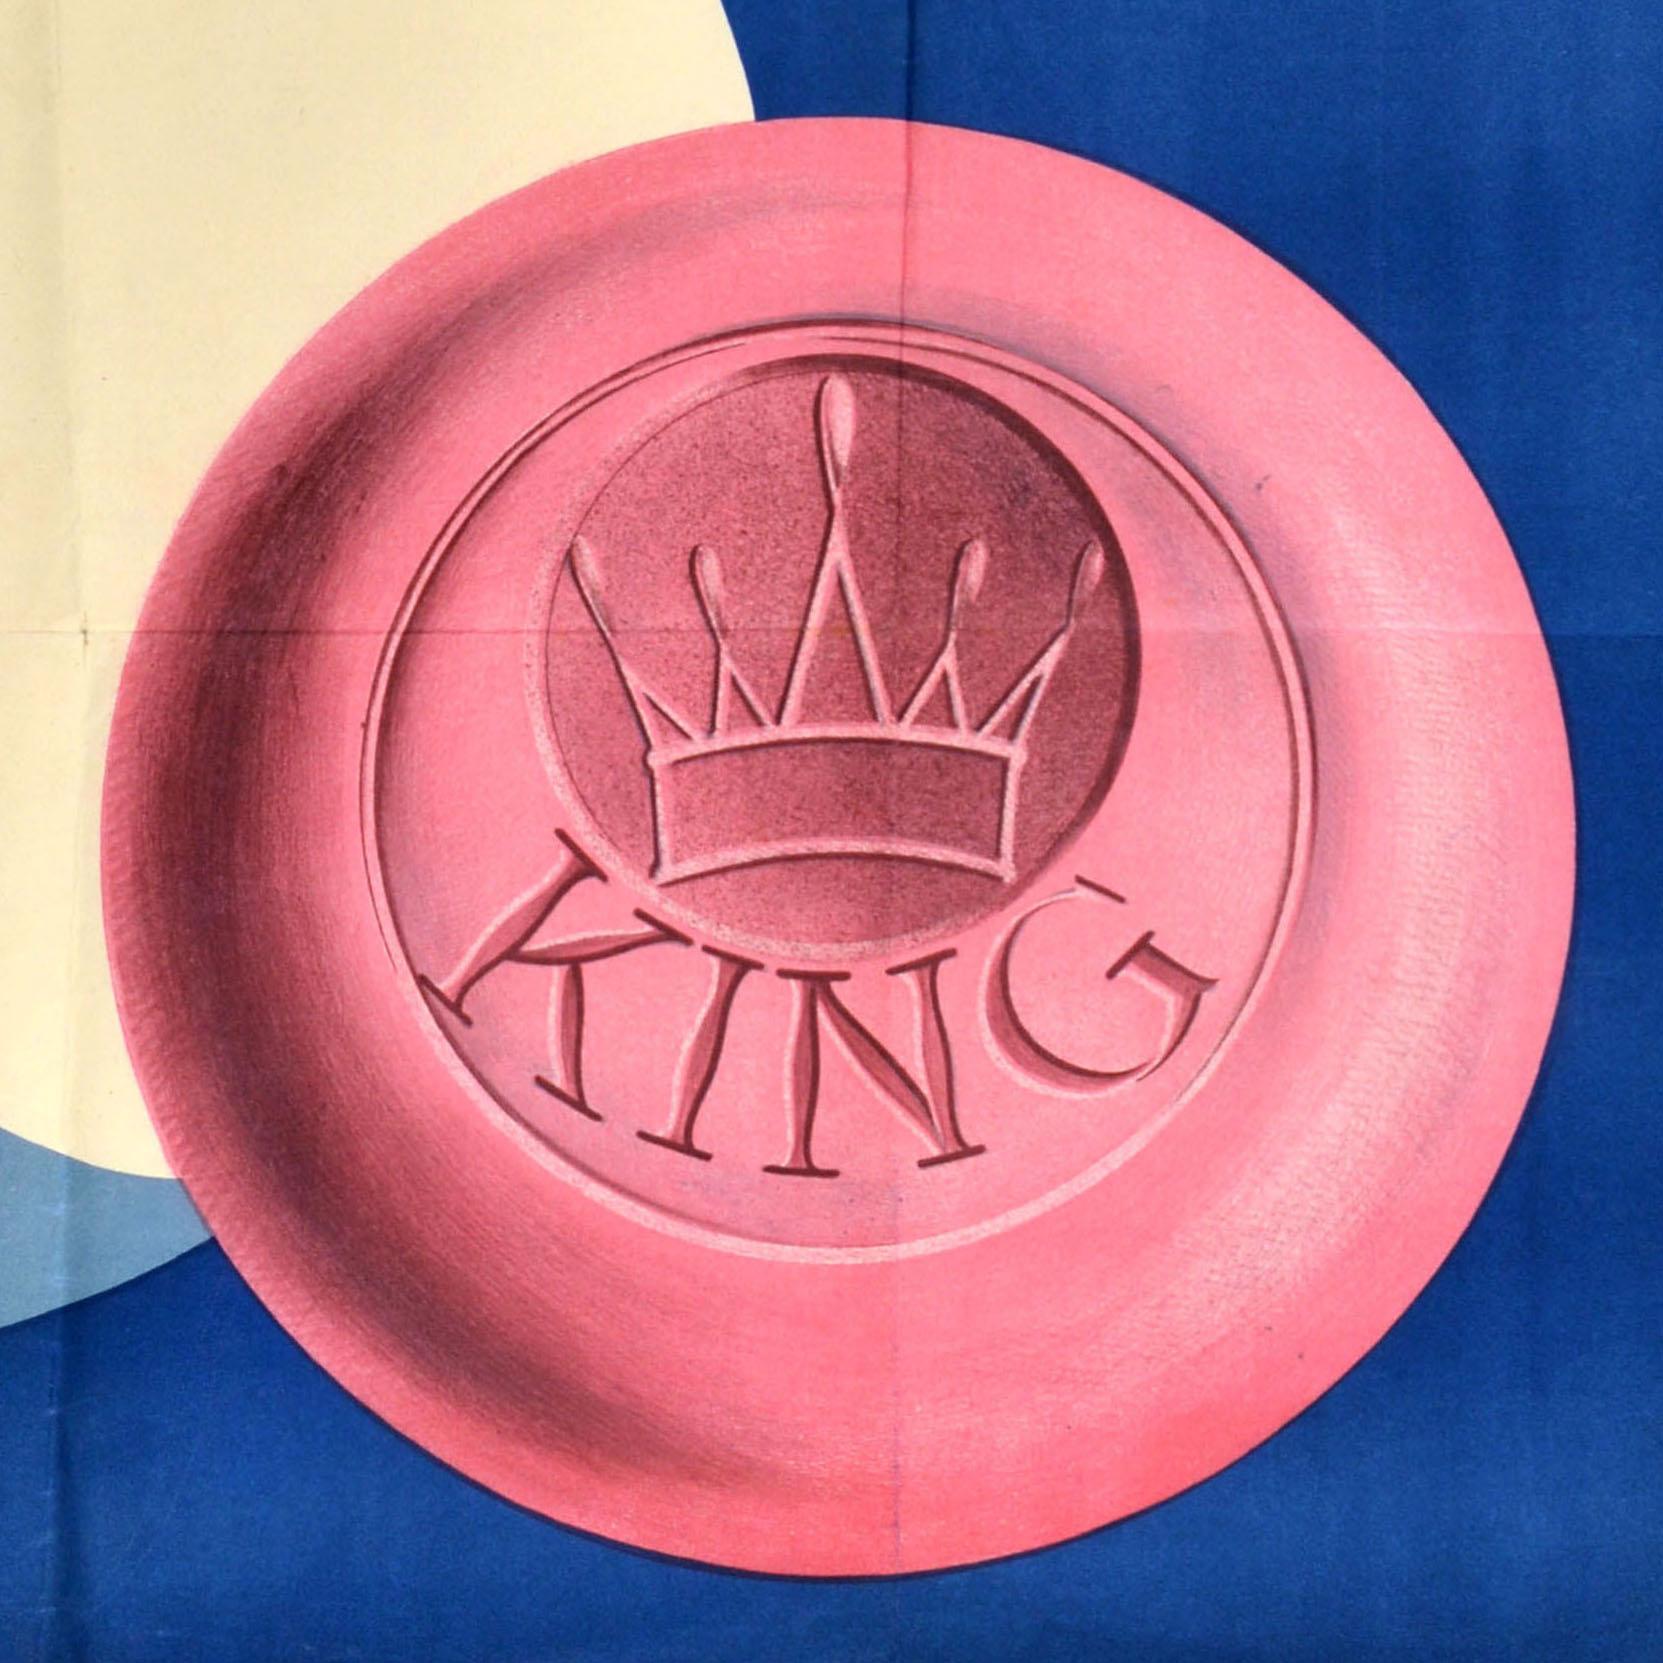 Original antique advertising poster for Bade Seife King bath soap featuring a colourful illustration of a pink round bar of soap bar marked with a crown and the brand name King in front of a blue sea wave topped with a crown and a spray of water